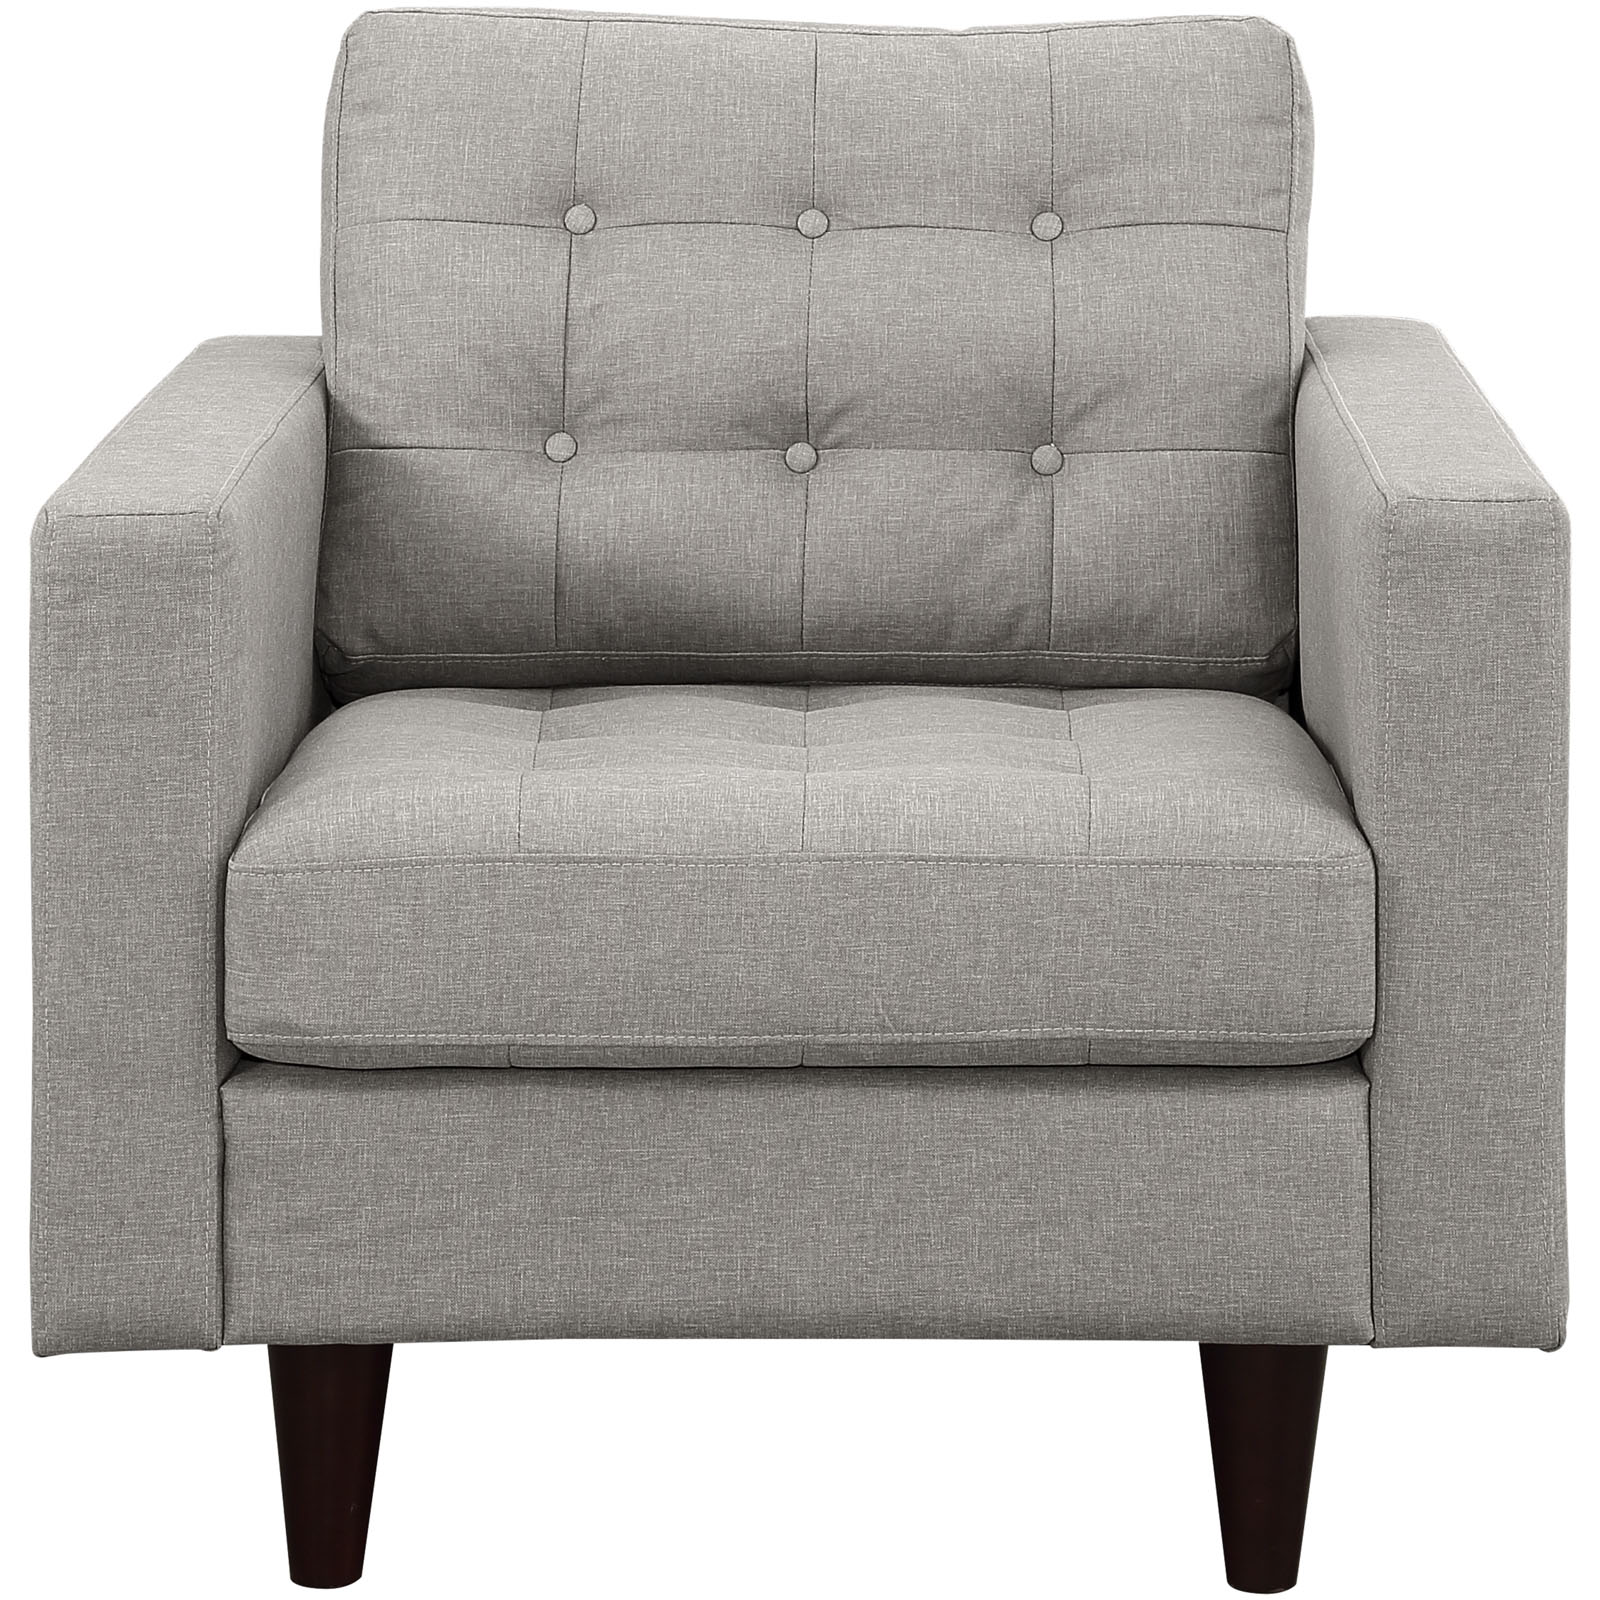 Modway Empress Upholstered Fabric Armchair in Light Gray - image 3 of 5